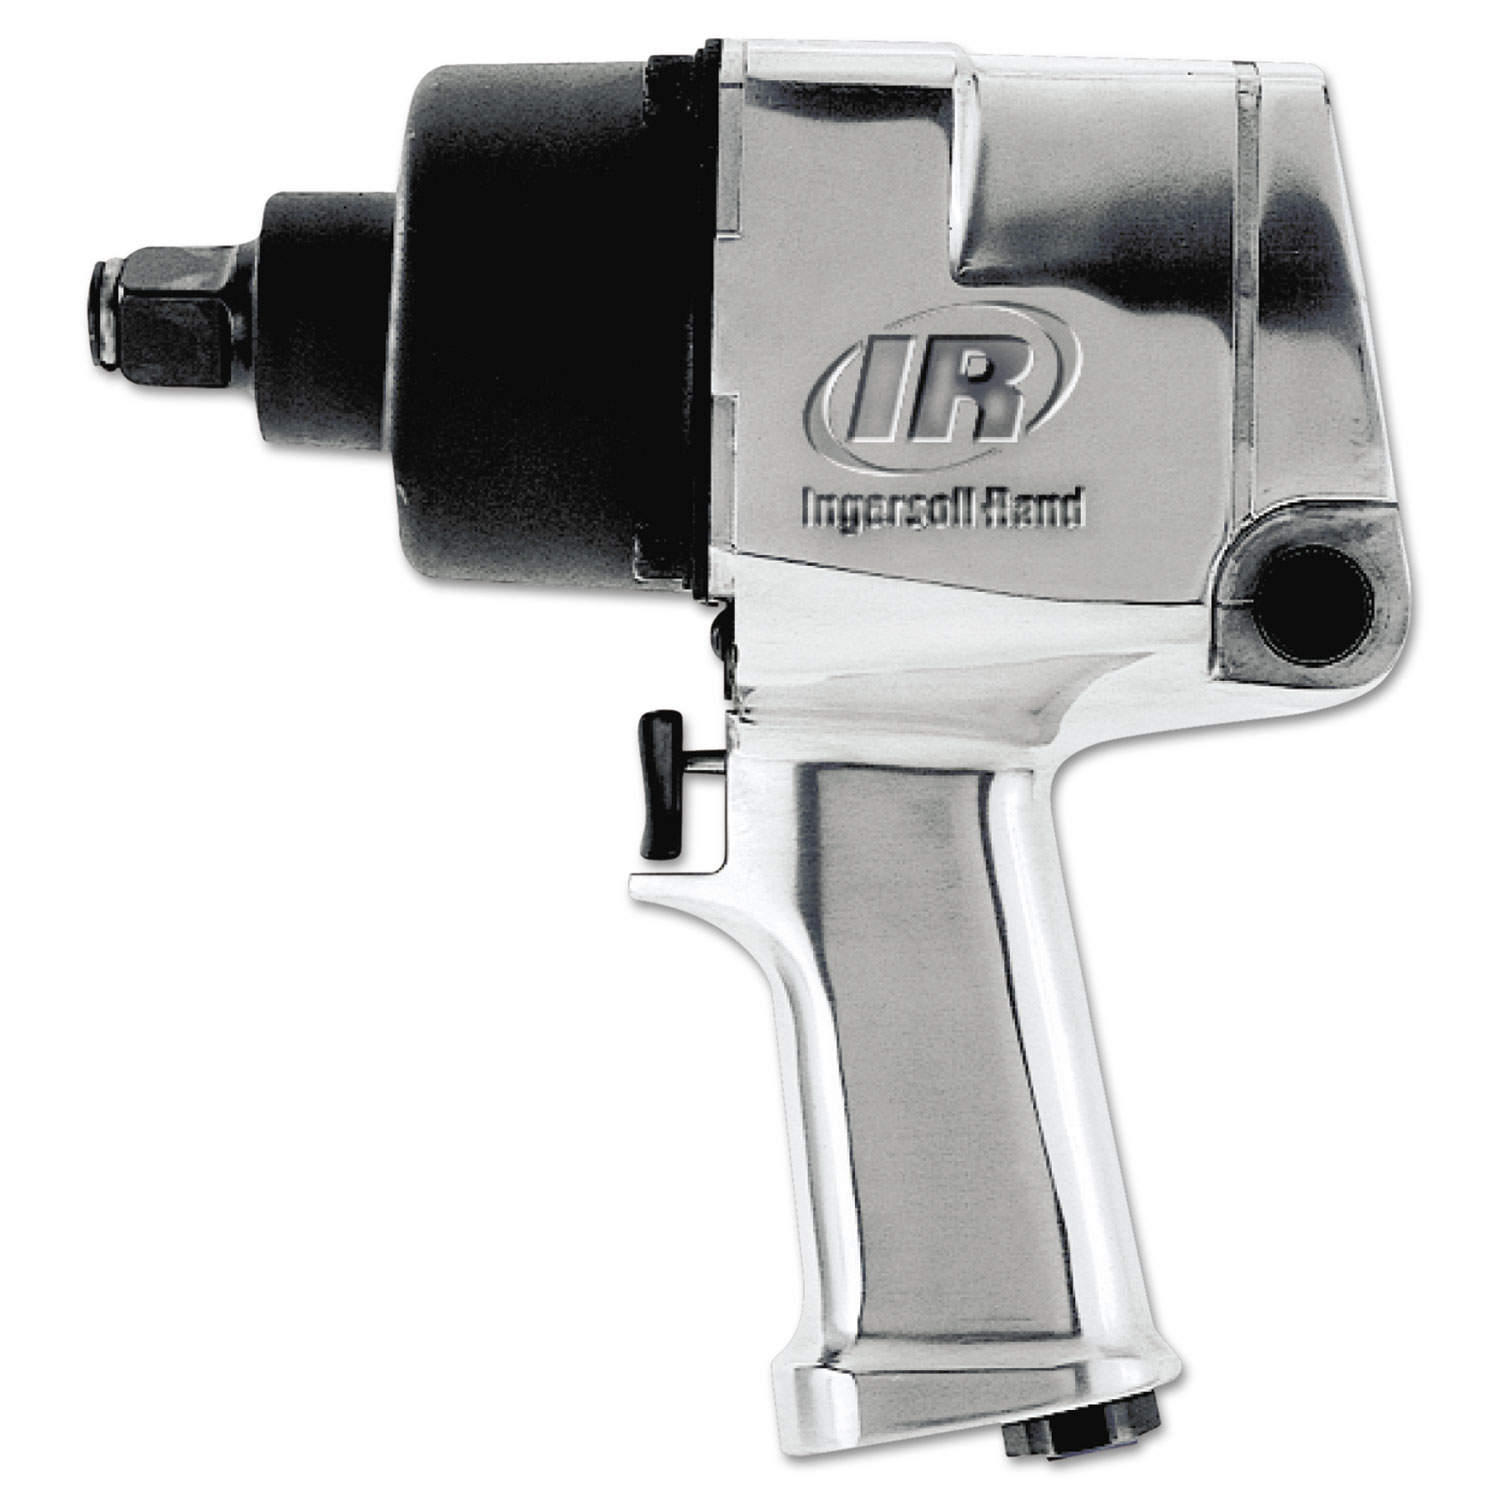  Ingersoll Rand 261 Super-Duty 3/4 Air Impactool Wrench (INR261) 